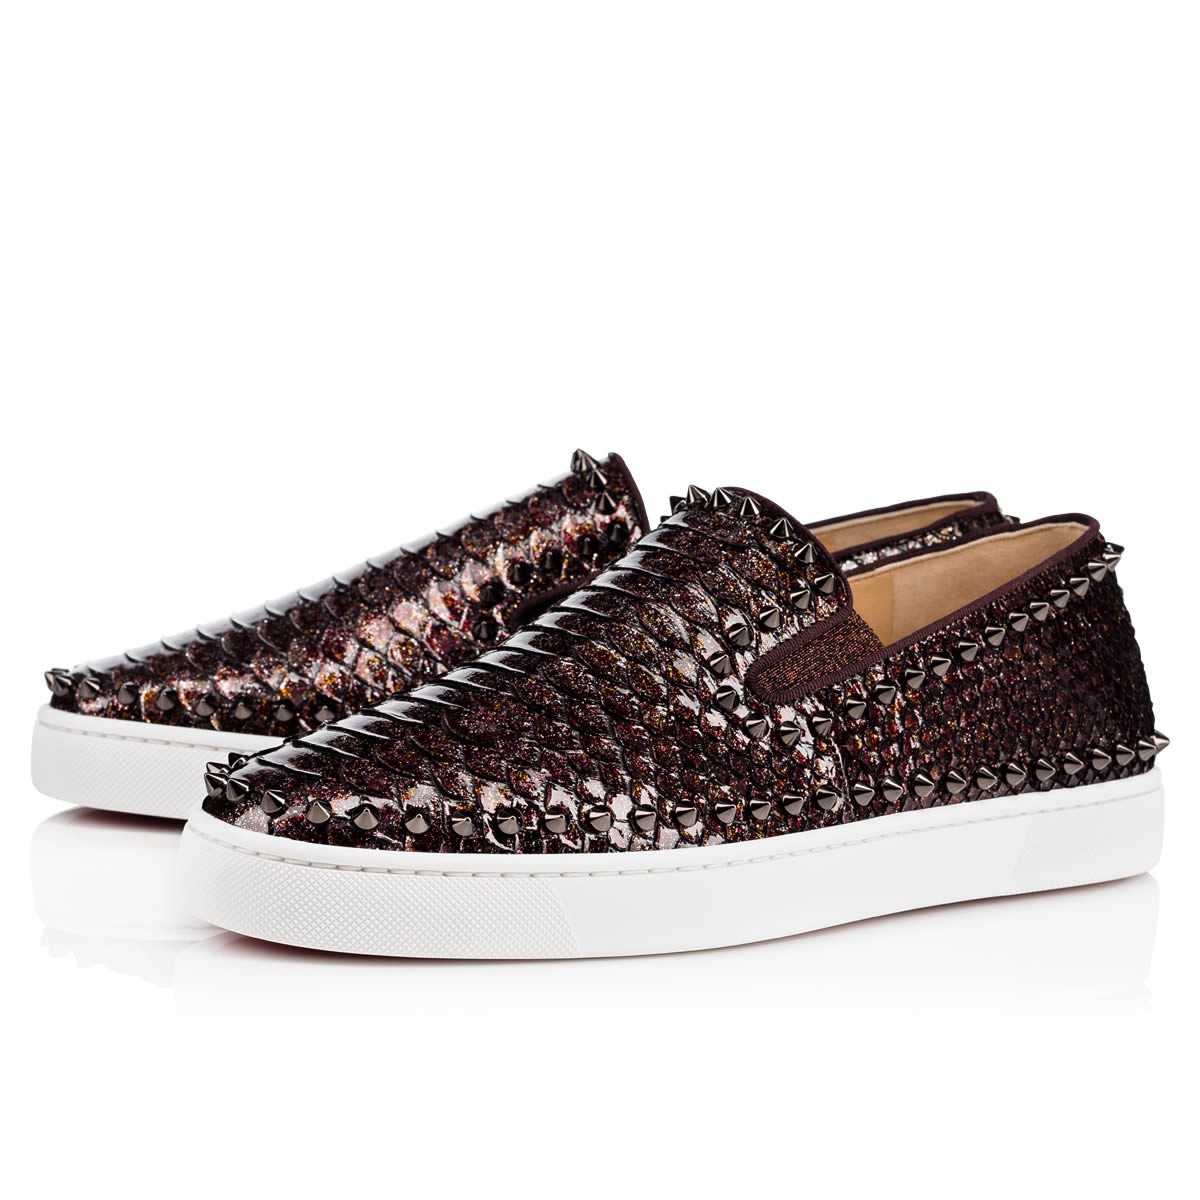 Christian Louboutin Sneakers: A Great Gift Idea